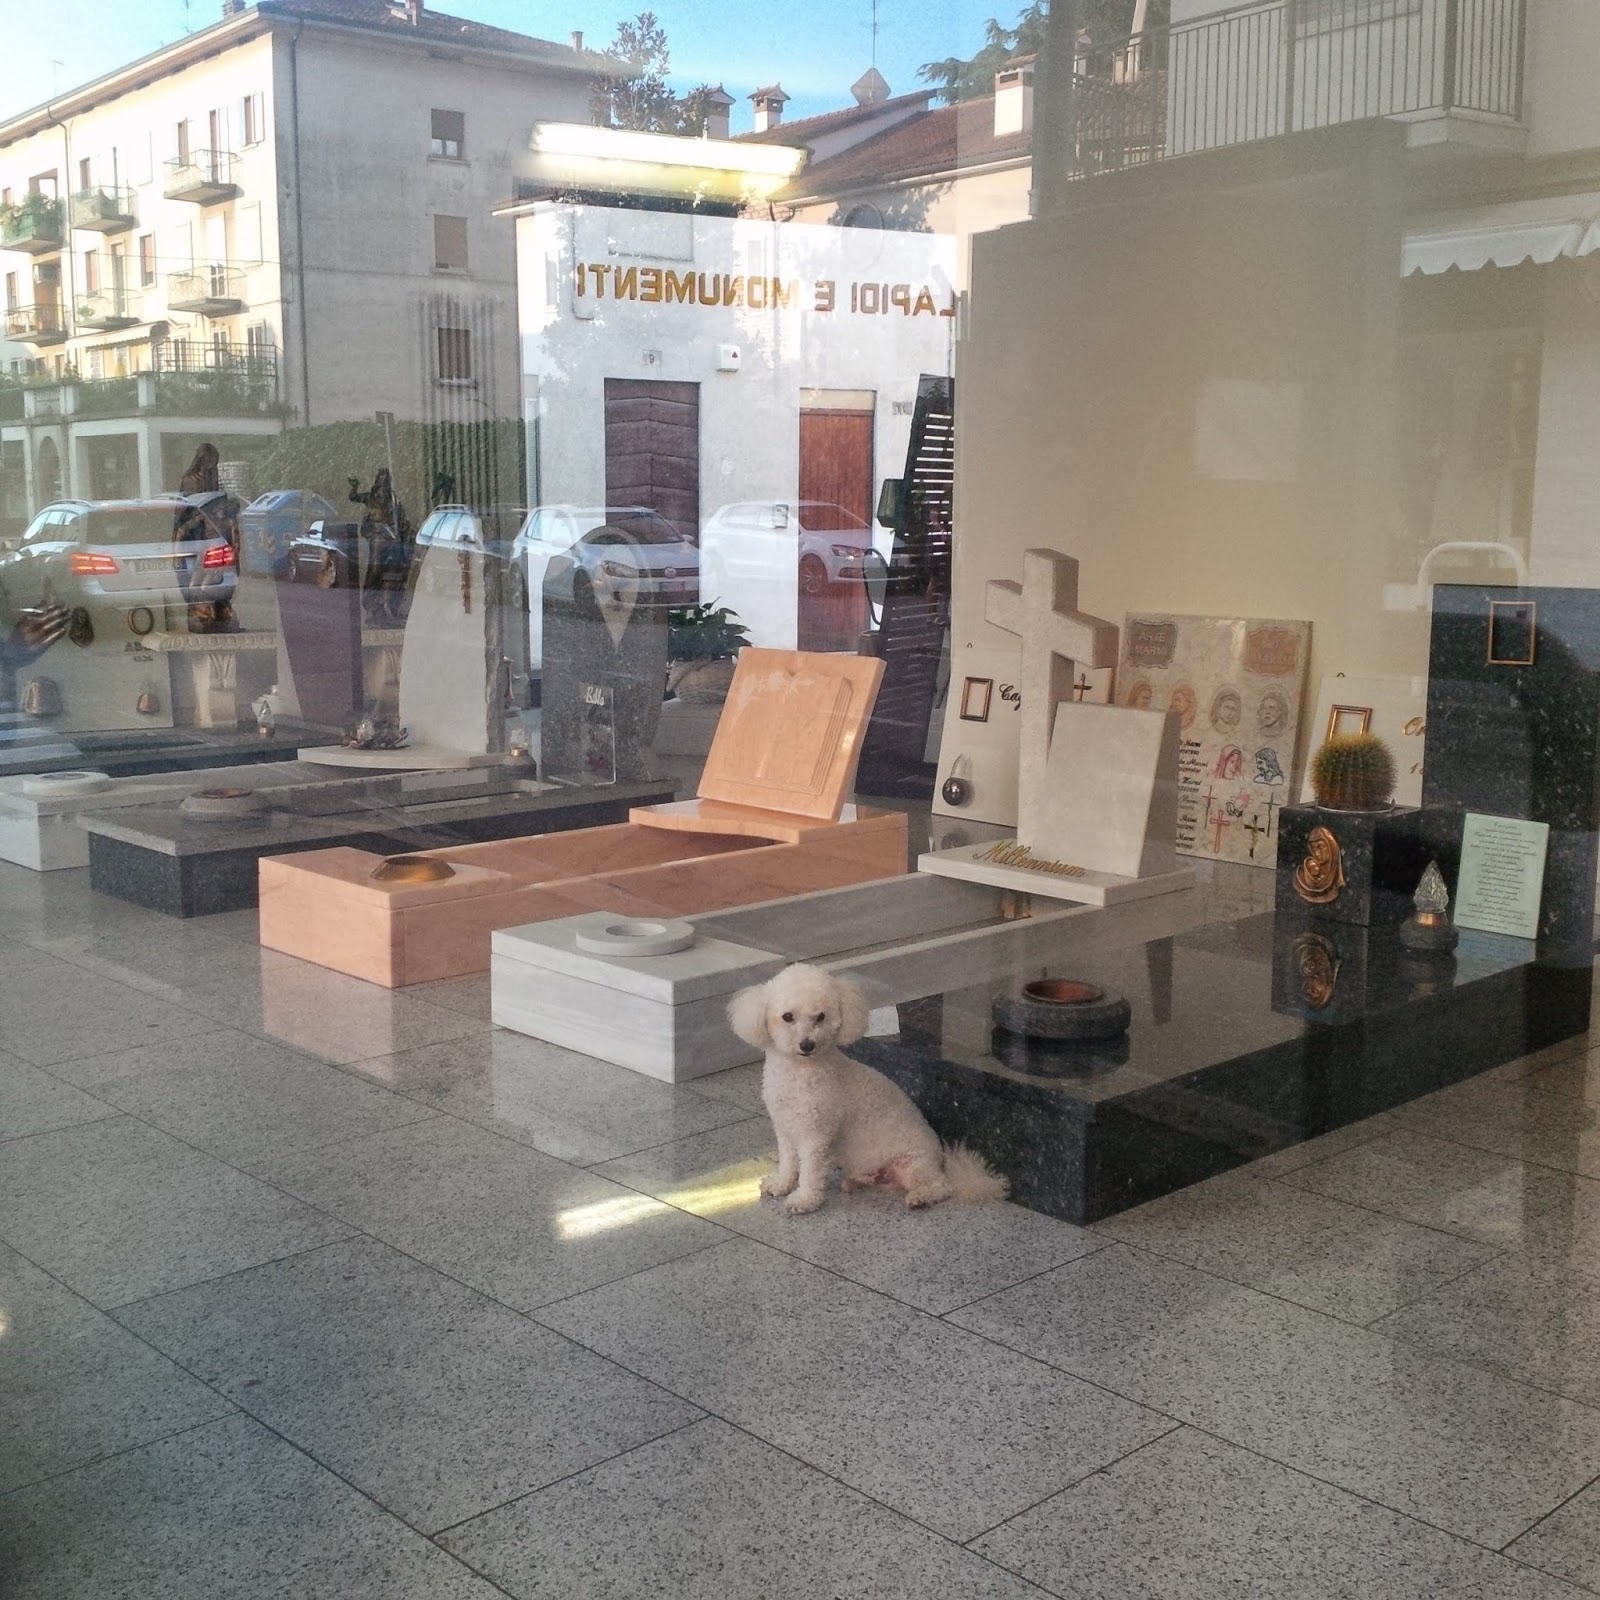 A cute little dog spends his days in this funeral shop